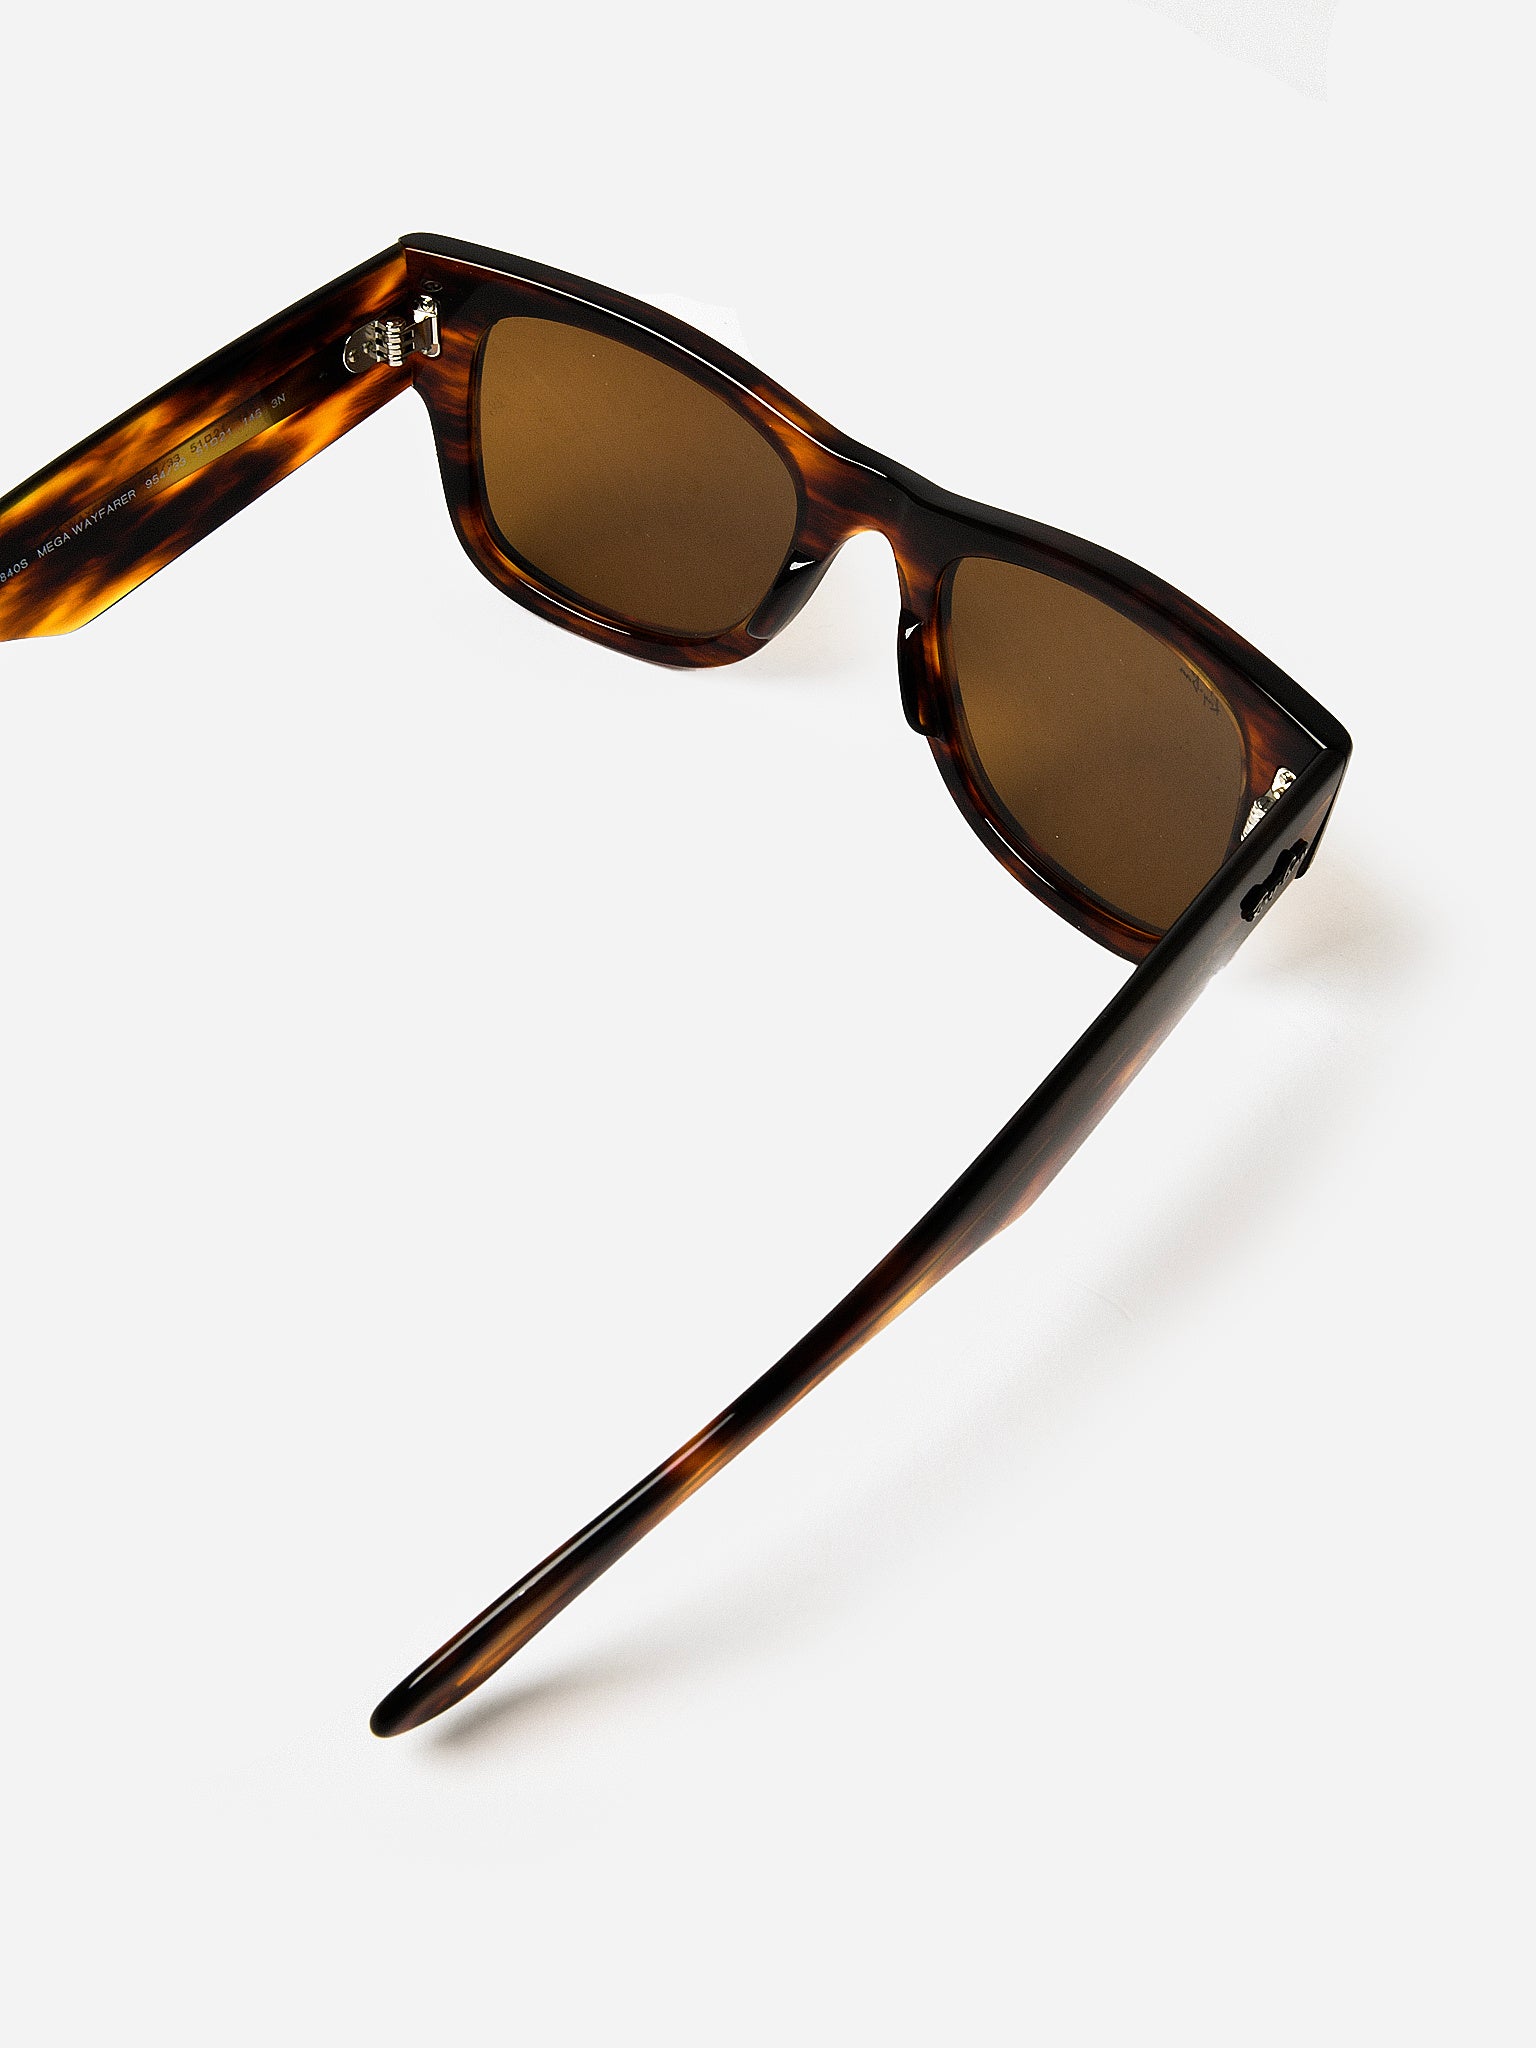 Ray-Ban Meta sunglasses have 'influencer' written all over them | TechCrunch